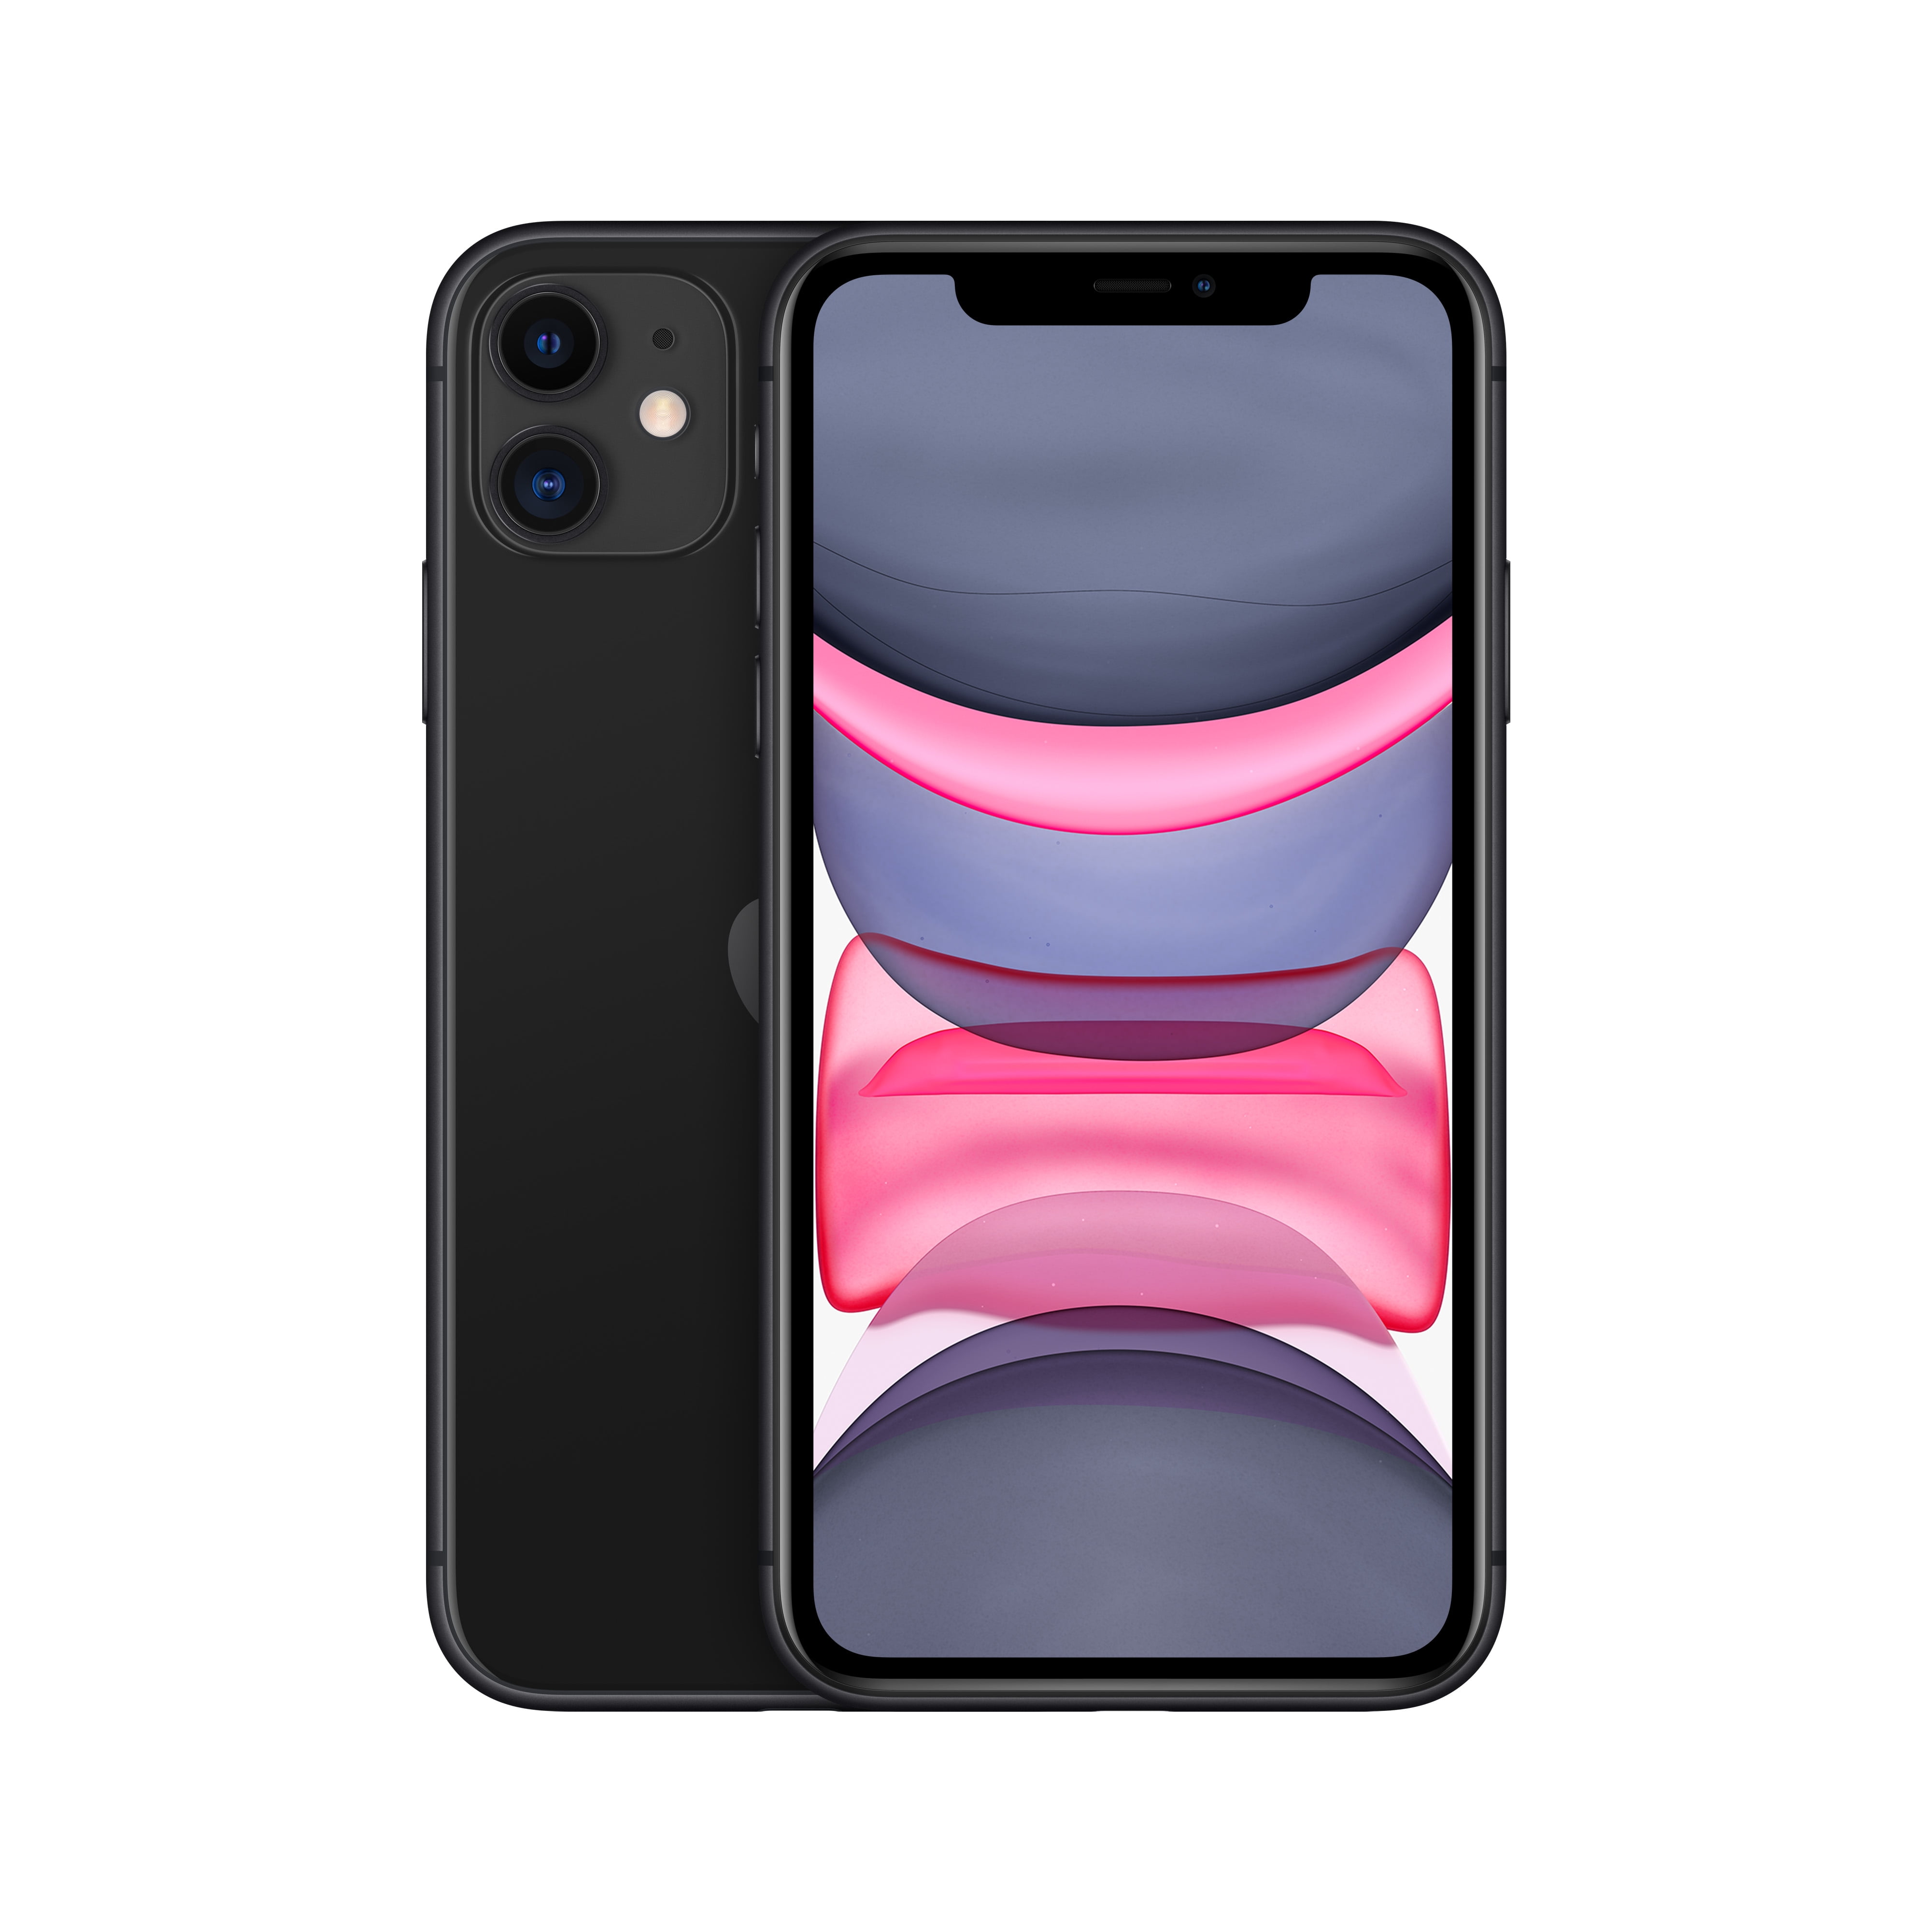 iPhone 11 - Technical Specifications - Apple (BY)